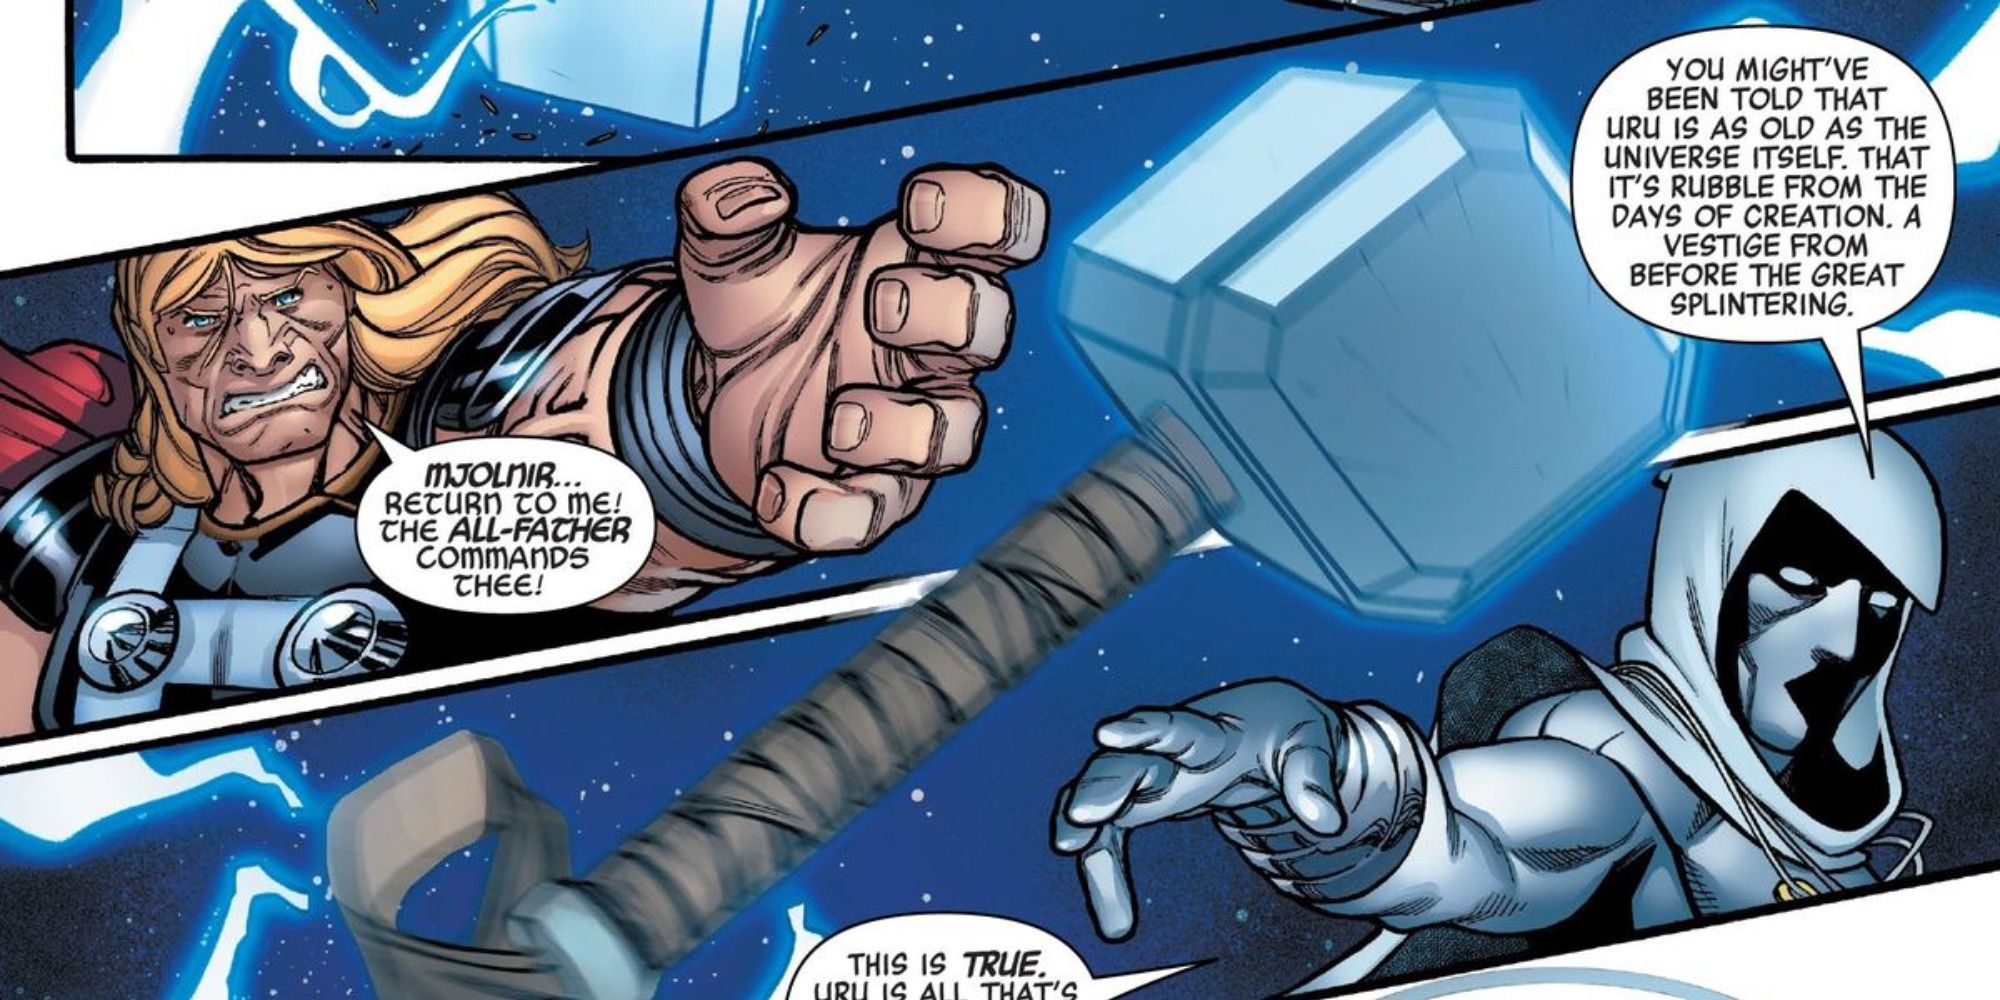 An image of Moon Knight calling Thors Hammer in the Marvel comics